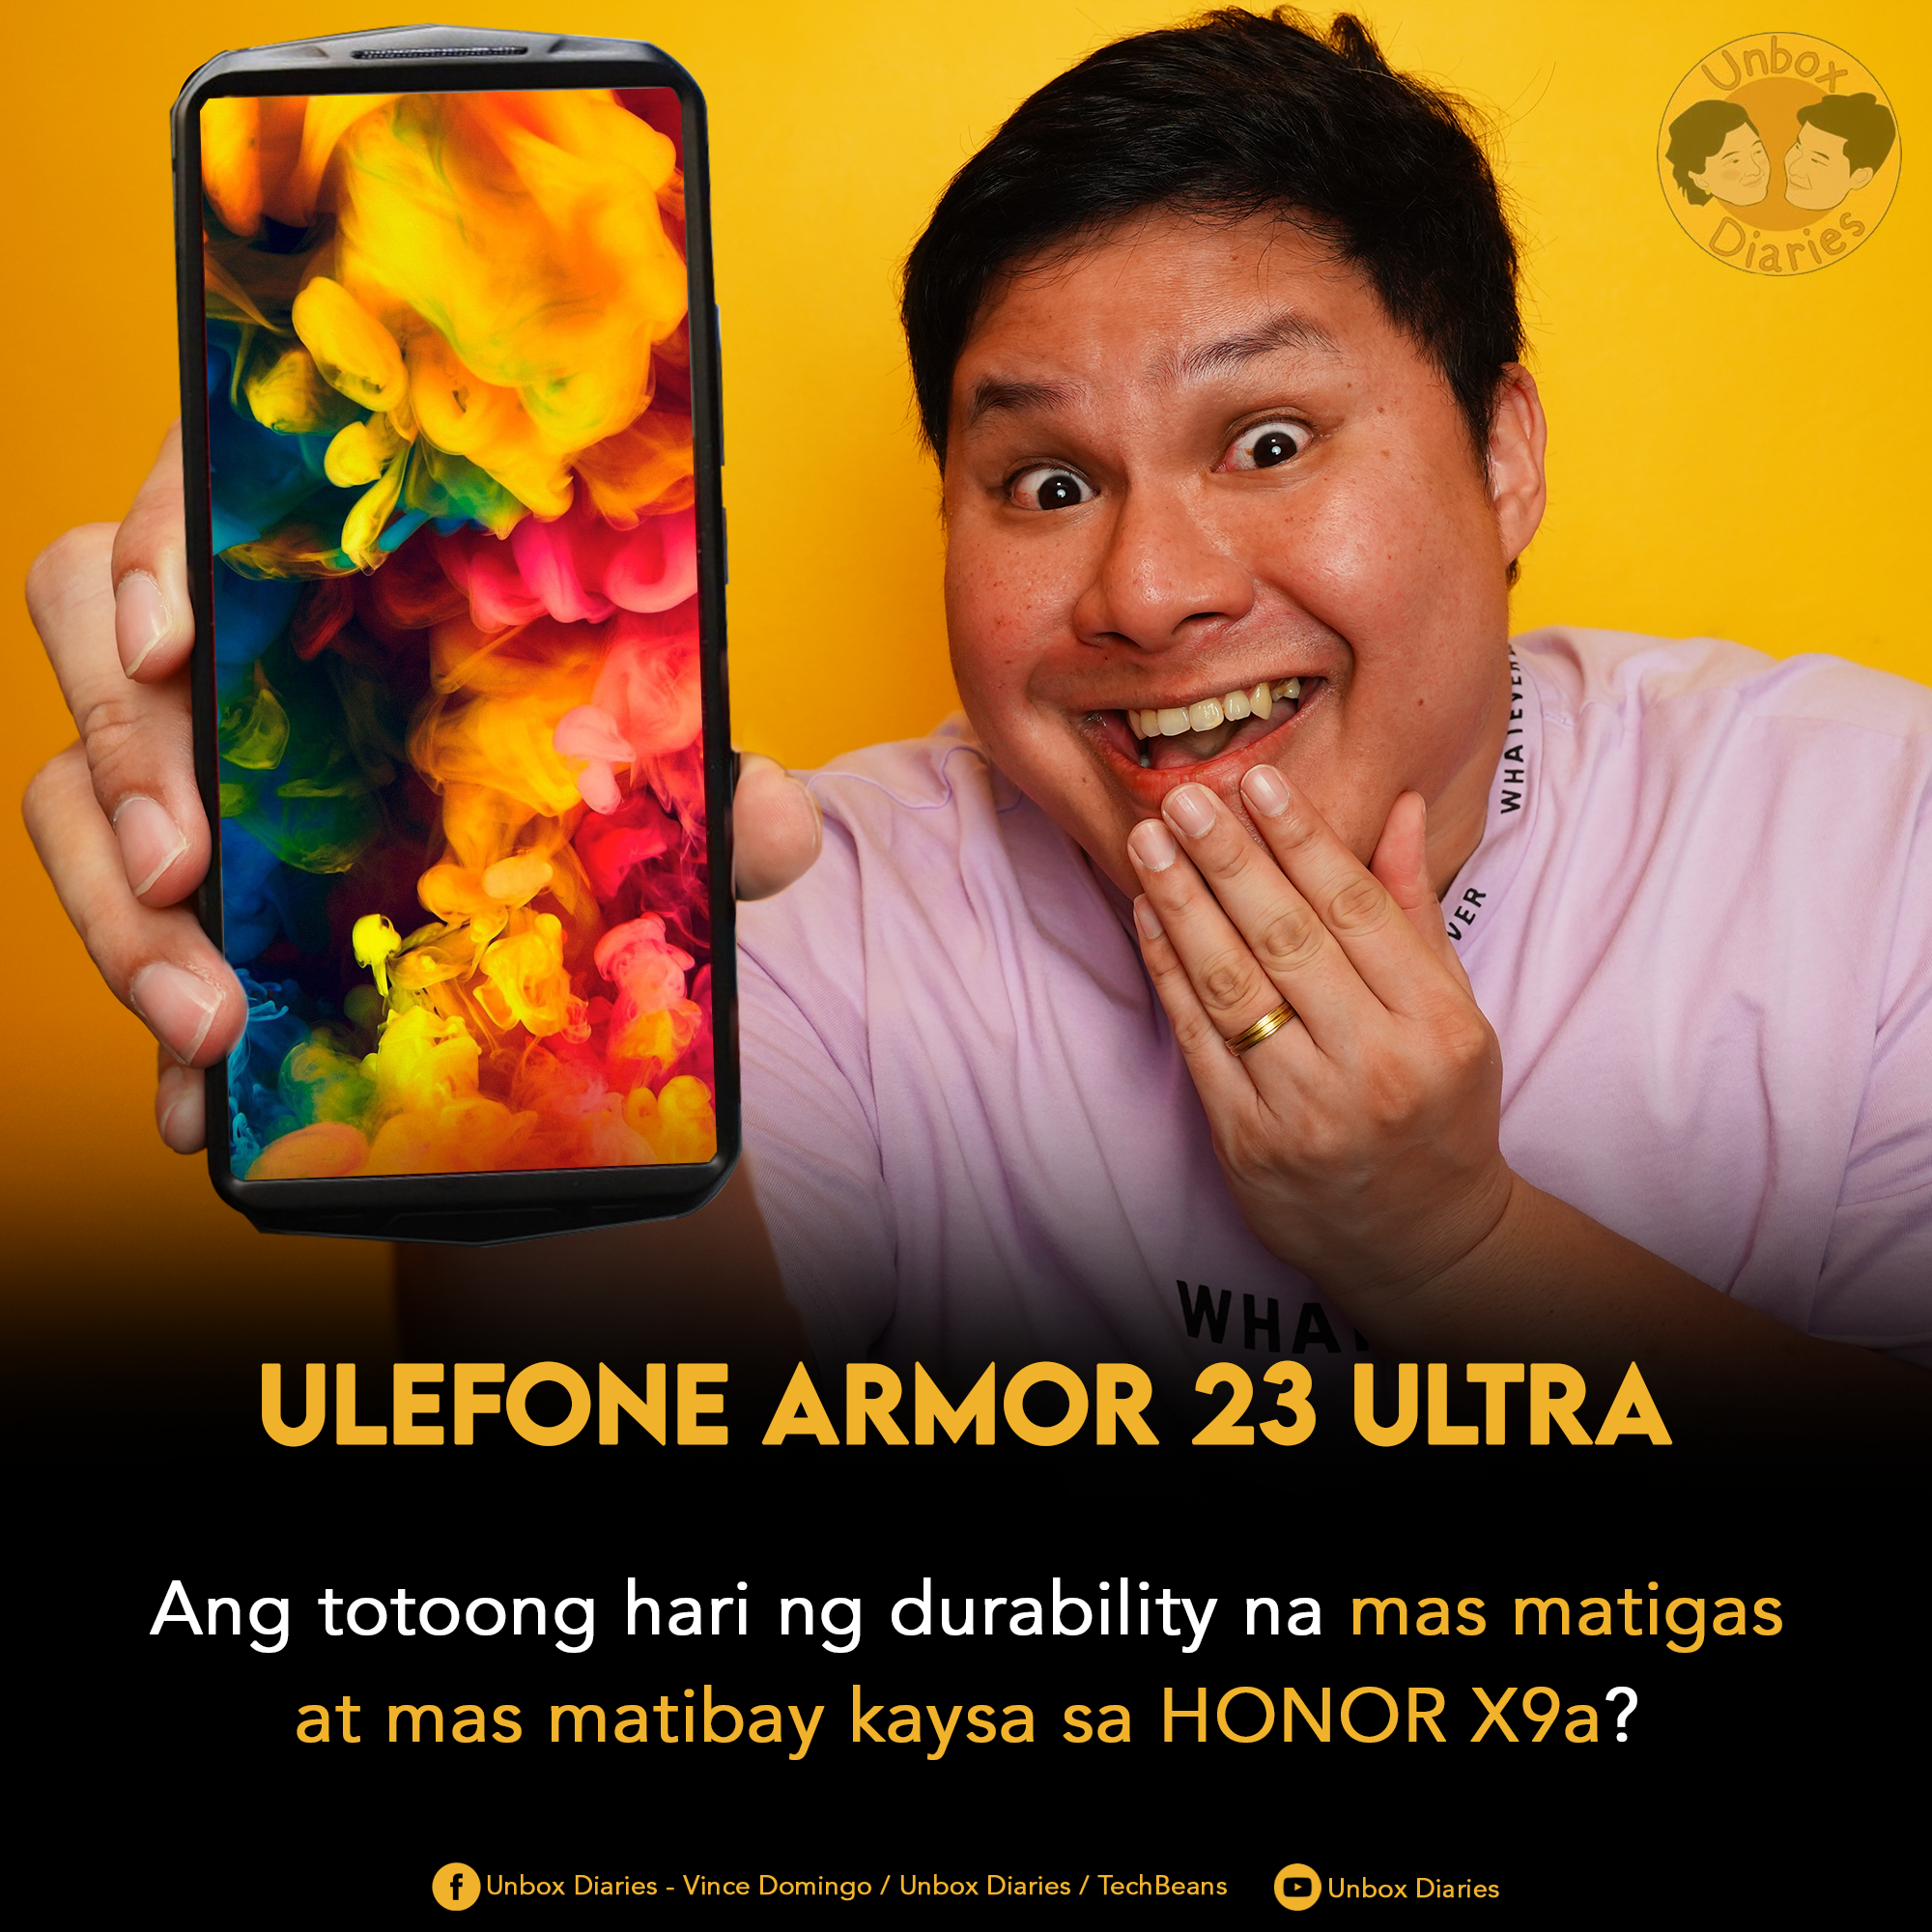 Ulefone Armor 23 Ultra review